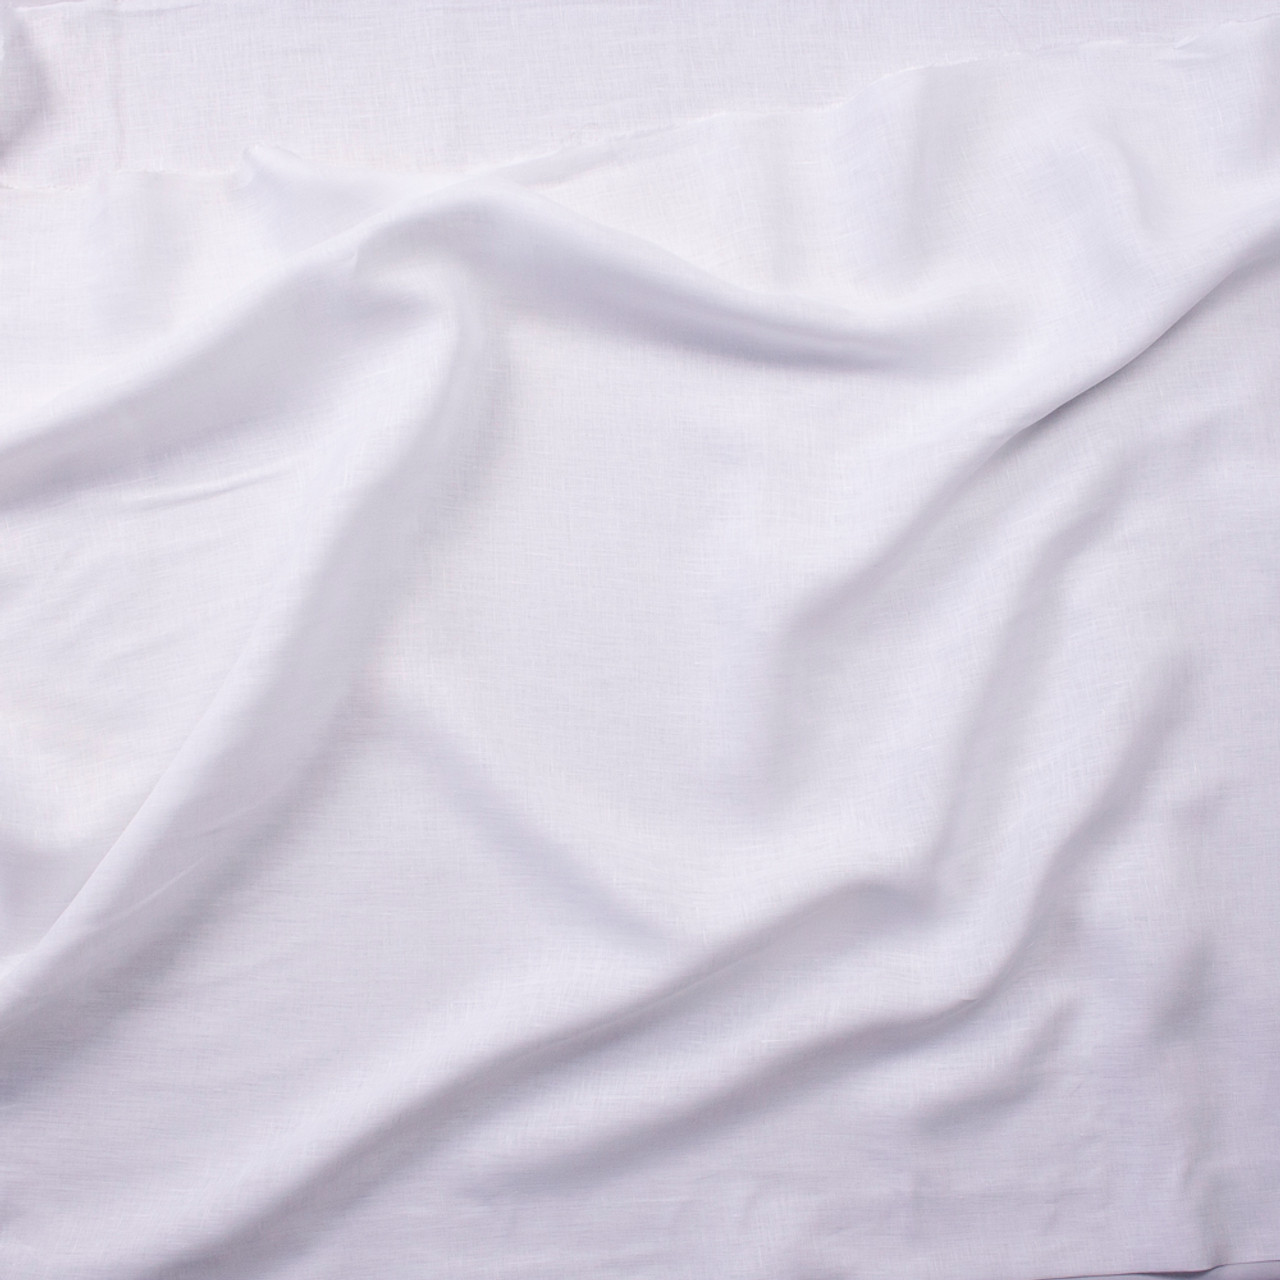 Cali Fabrics Solid White Lightweight Linen Fabric by the Yard